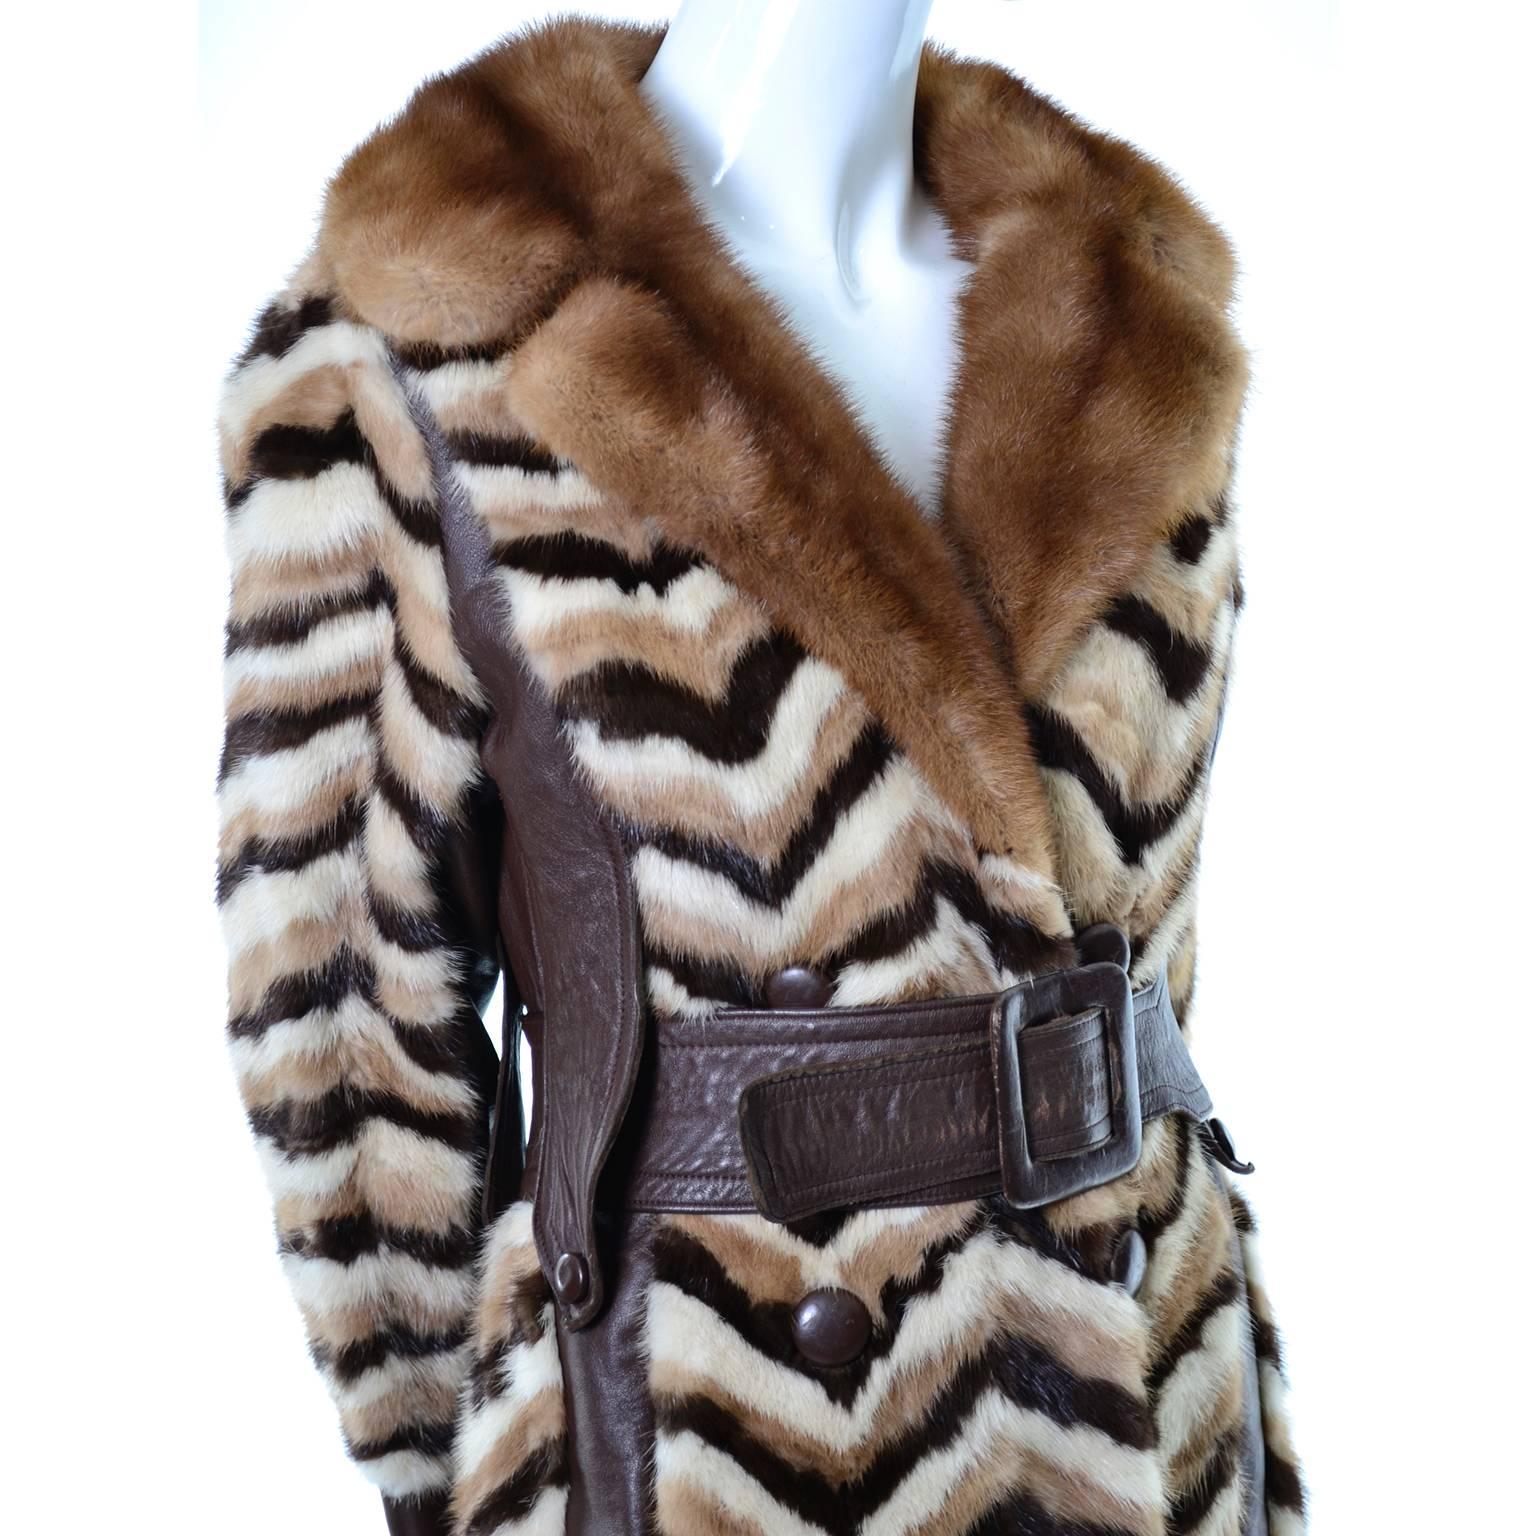 This is an extraordinary vintage mink, leather and dyed fur coat from designer Donald Brooks.  The coat has tri-color fur on the body and a pretty natural mink collar.  There are leather details including leather panels, buttons, collar lining, and